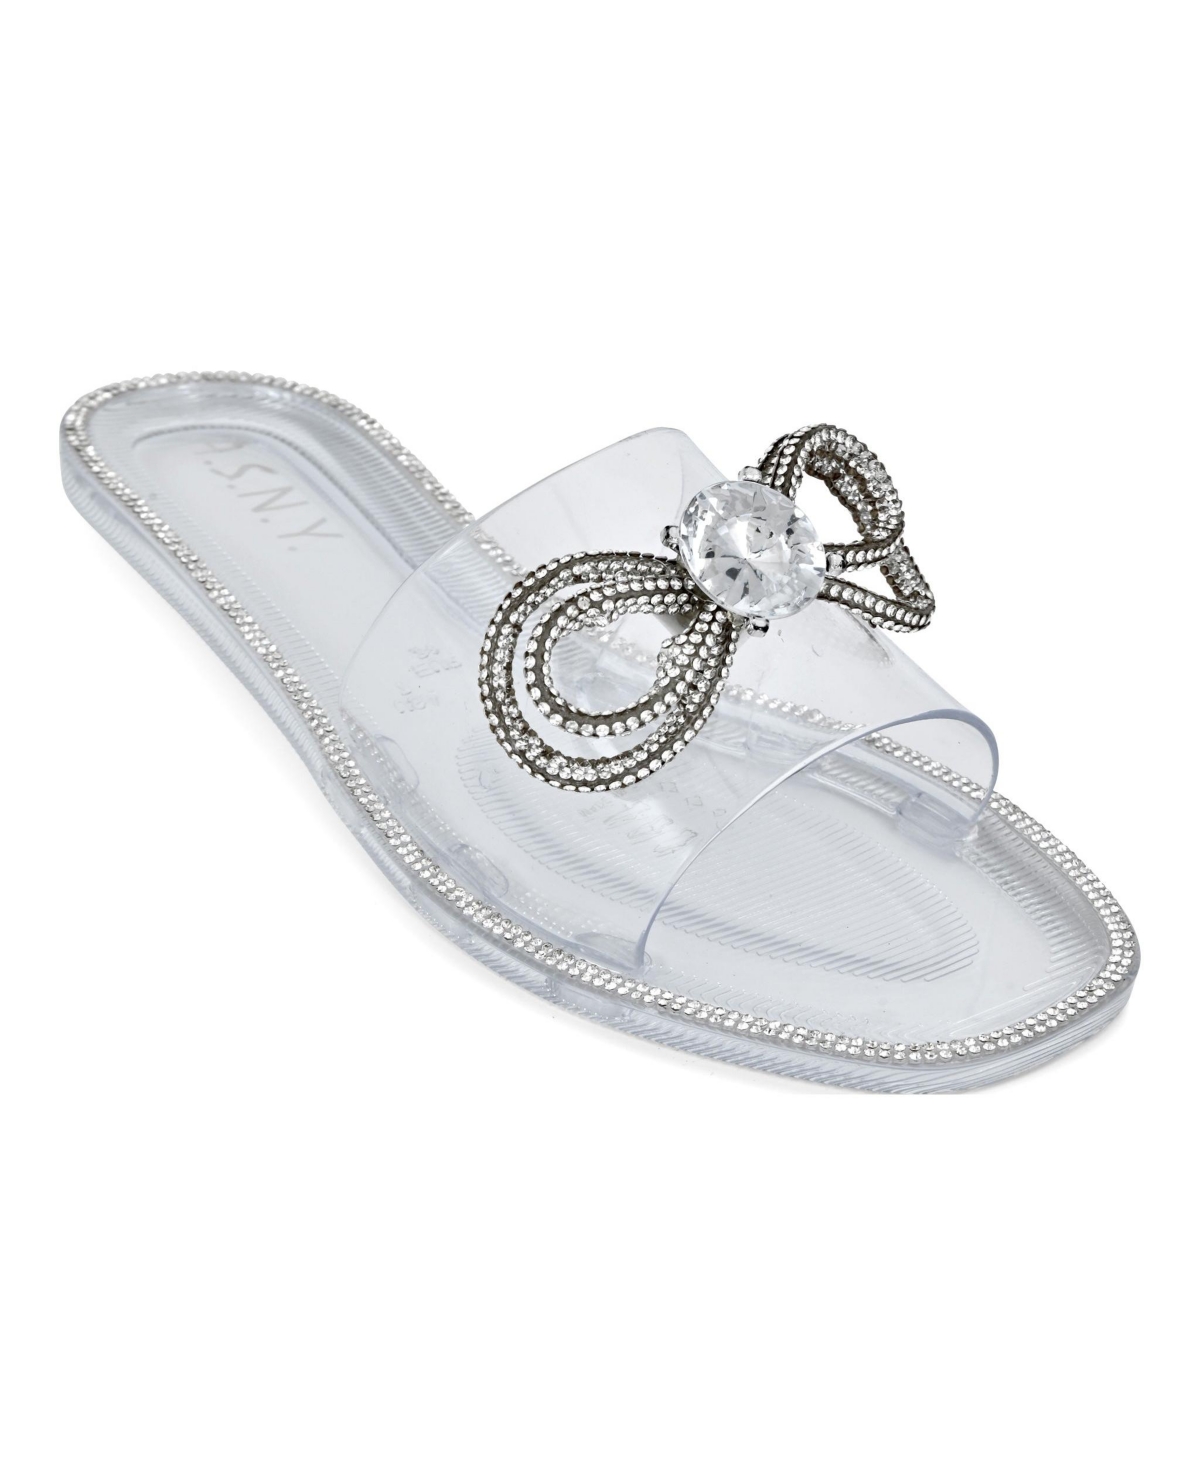 Women s Catalina Jelly Sandals - Clear